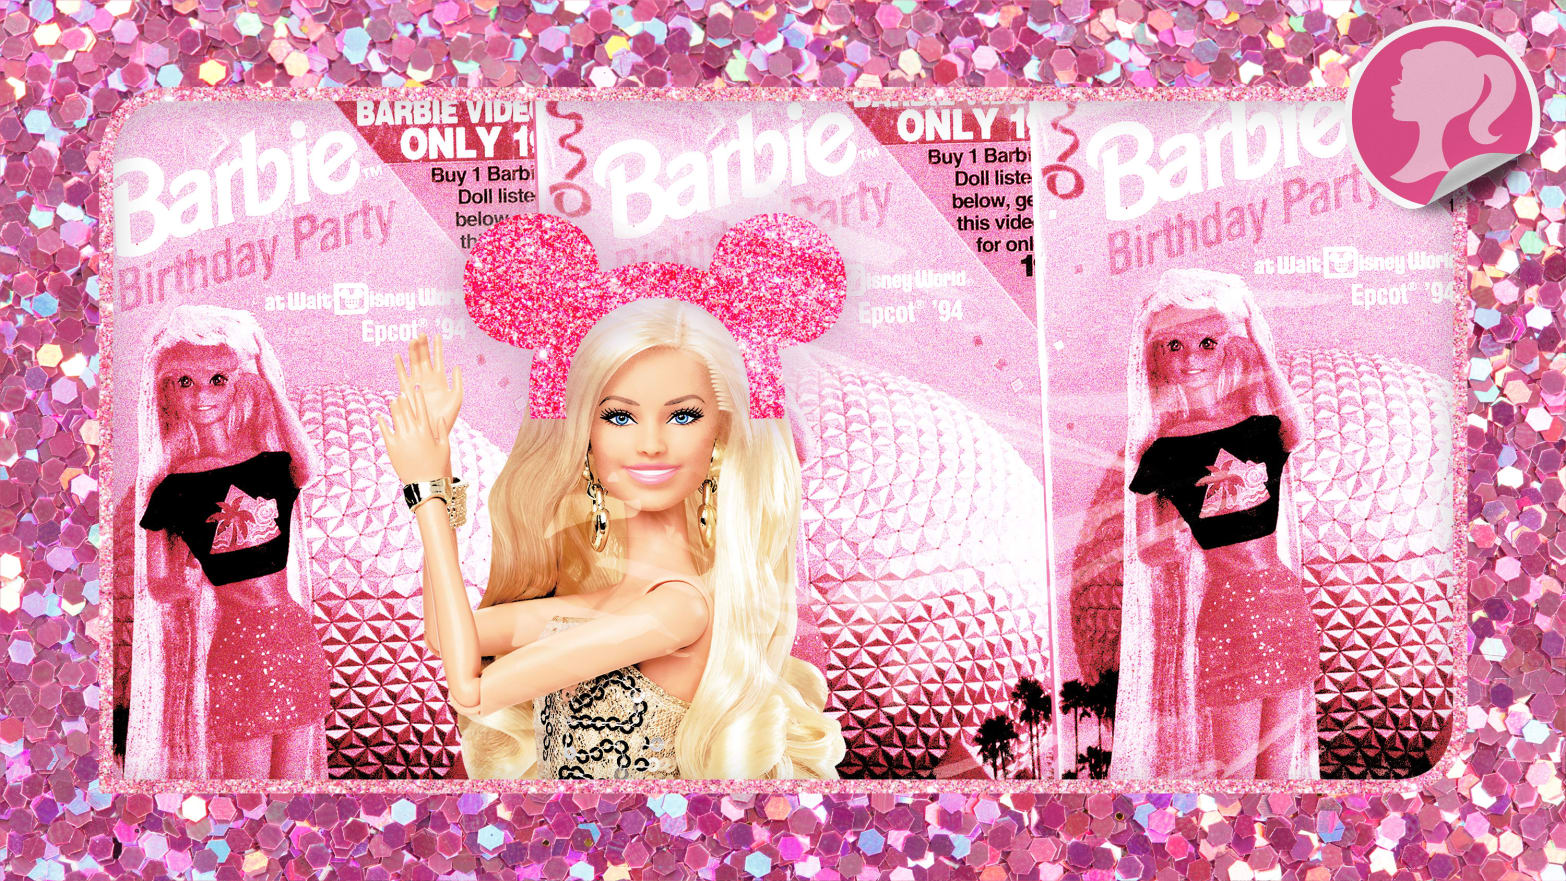 An illustration including photos of a Toy Barbie Doll and stills for the VHS Tape Barbie's Birthday Party in Disney World. 